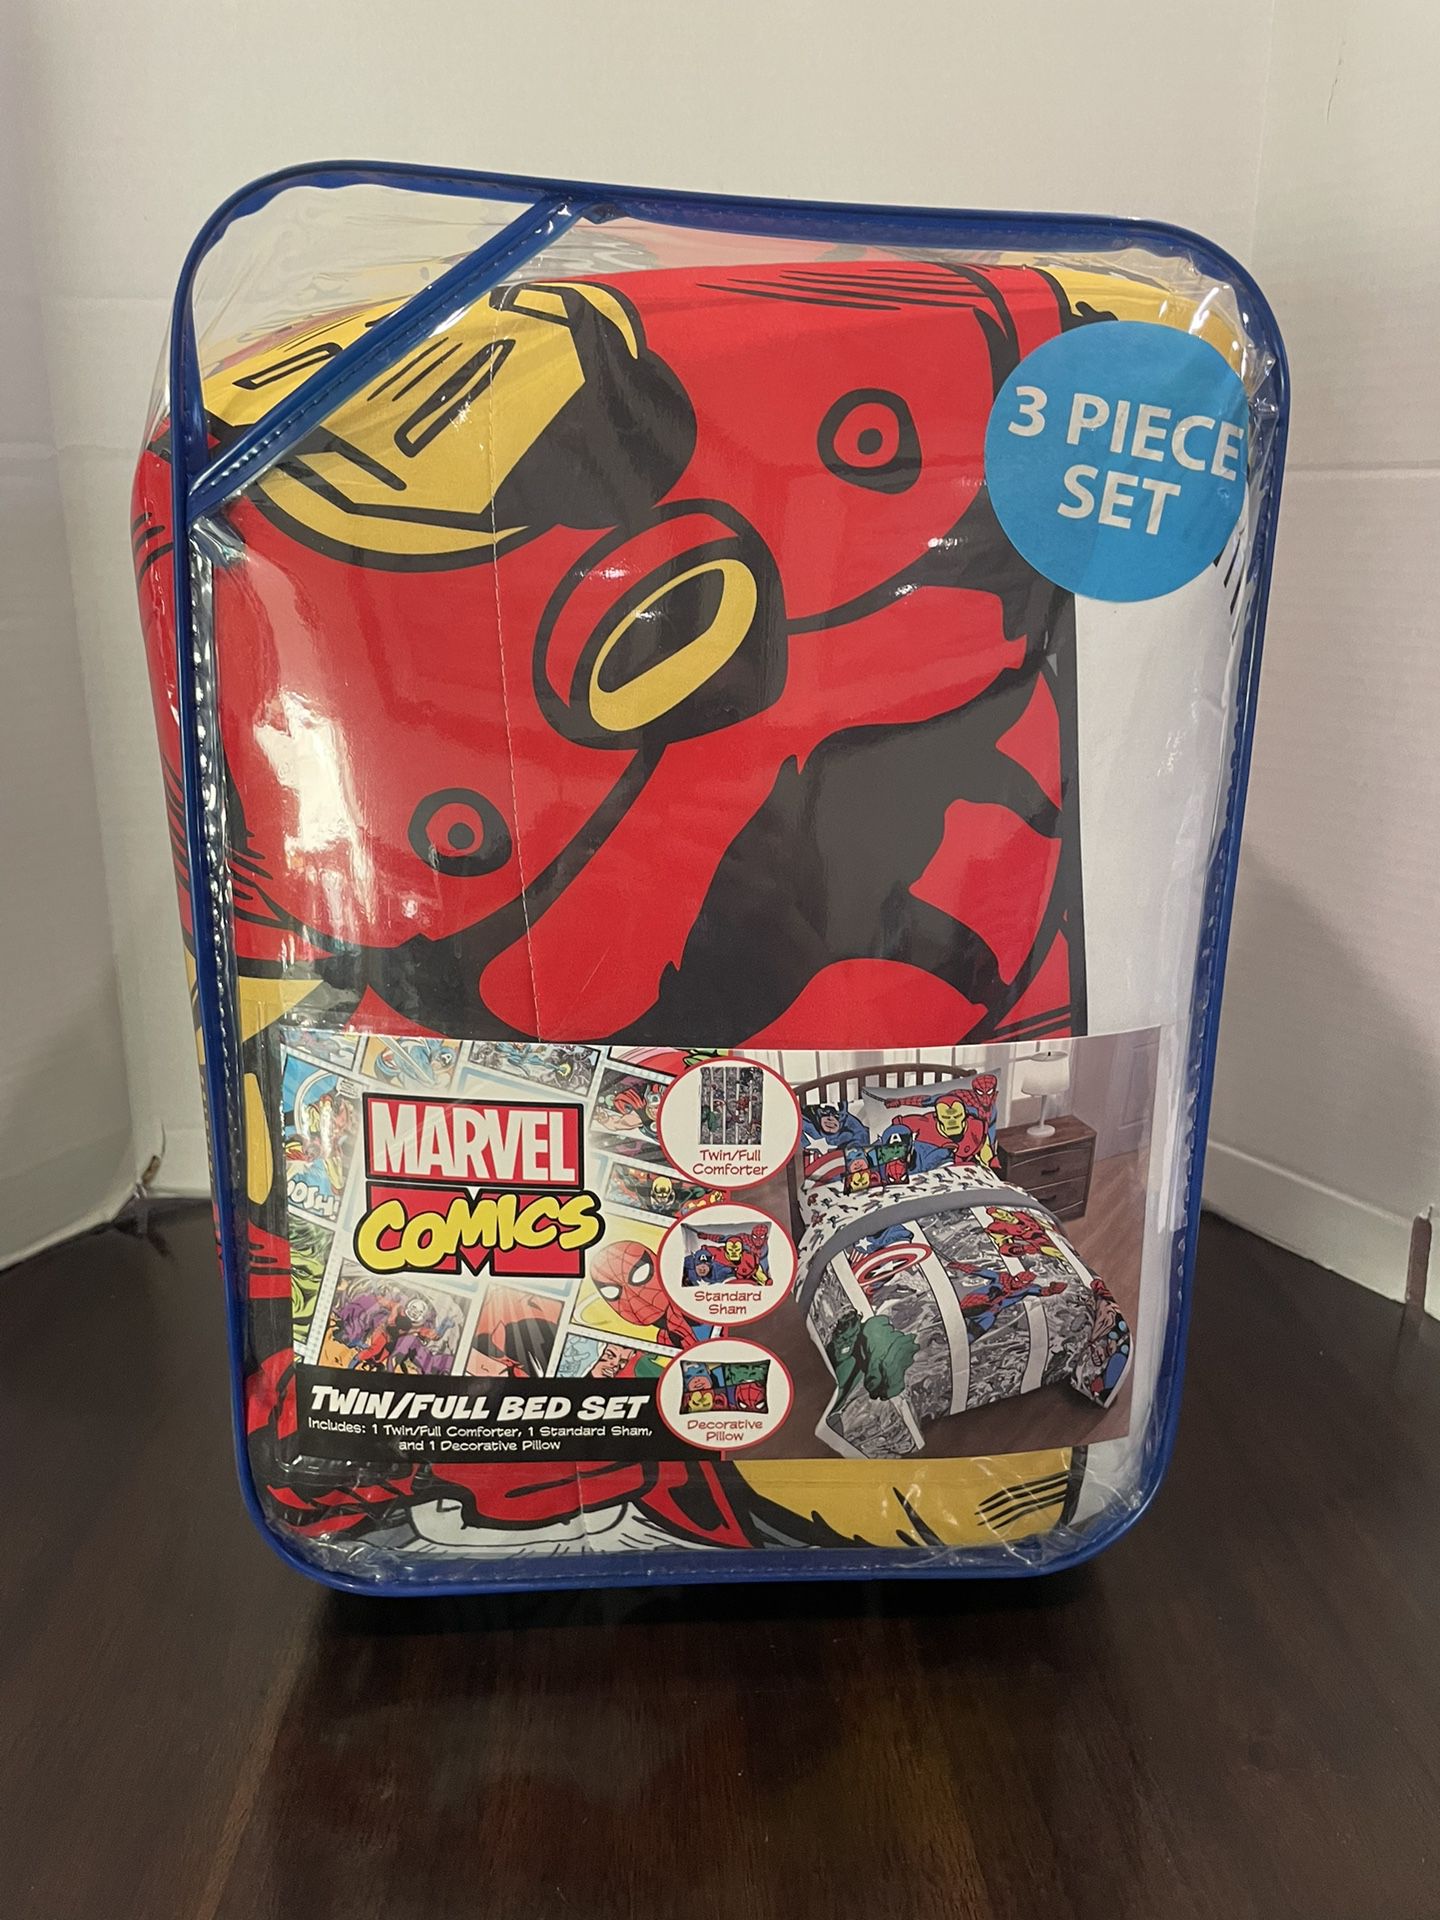 Marvel comics Twin/Full Bed set brand new in bag 